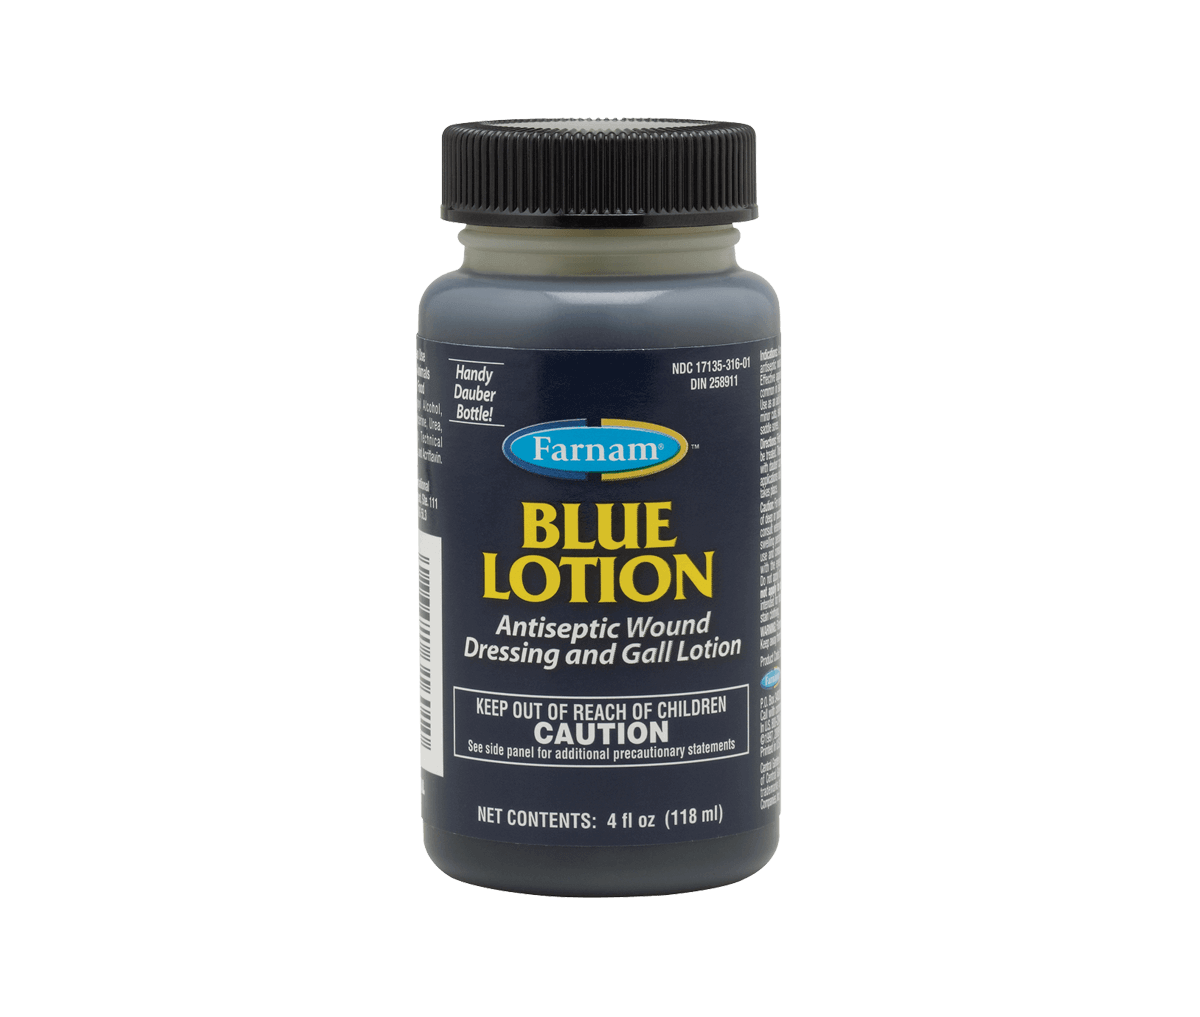 Blue Lotion is a quick-drying, deep-penetrating antiseptic wound dressing and gall lotion. Effective against bacterial infection most common in skin lesions of horses and dogs. Use as an aid in the treatment of surface wounds, minor cuts, skin abrasions, harness galls and saddle sores.